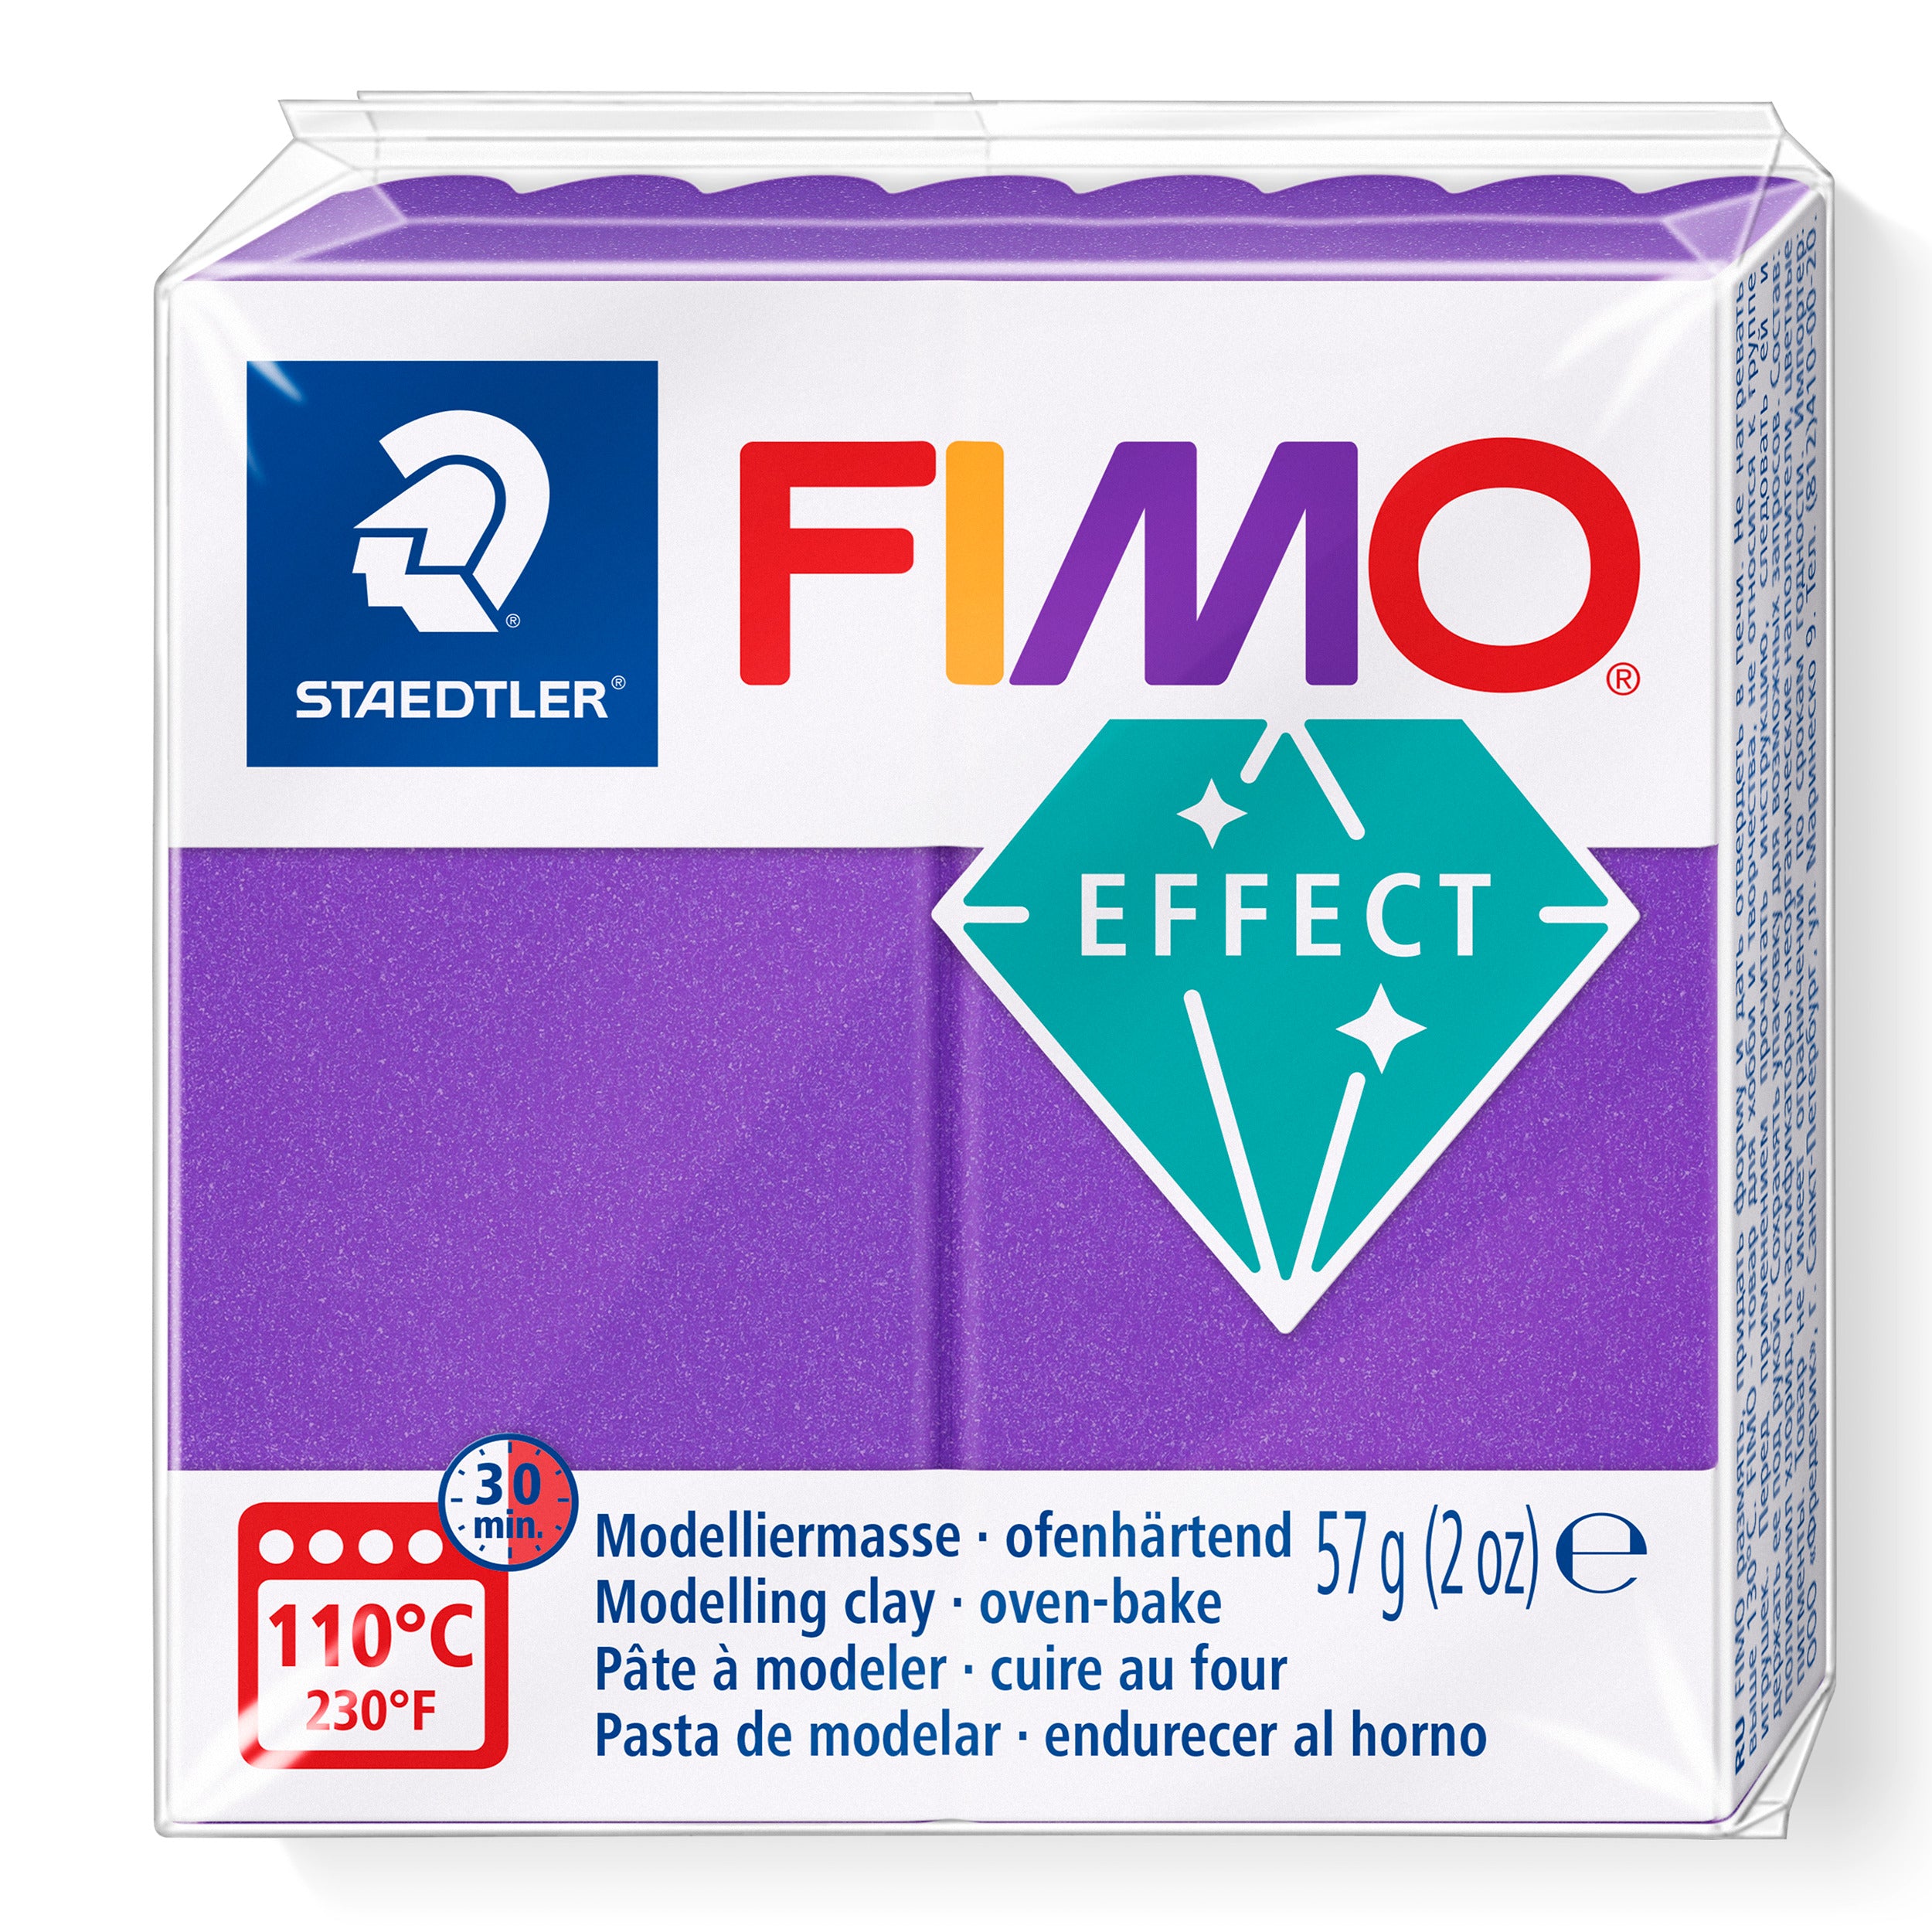 NEW Metallic Lilac FIMO Effect polymer Clay 57g 8010-61